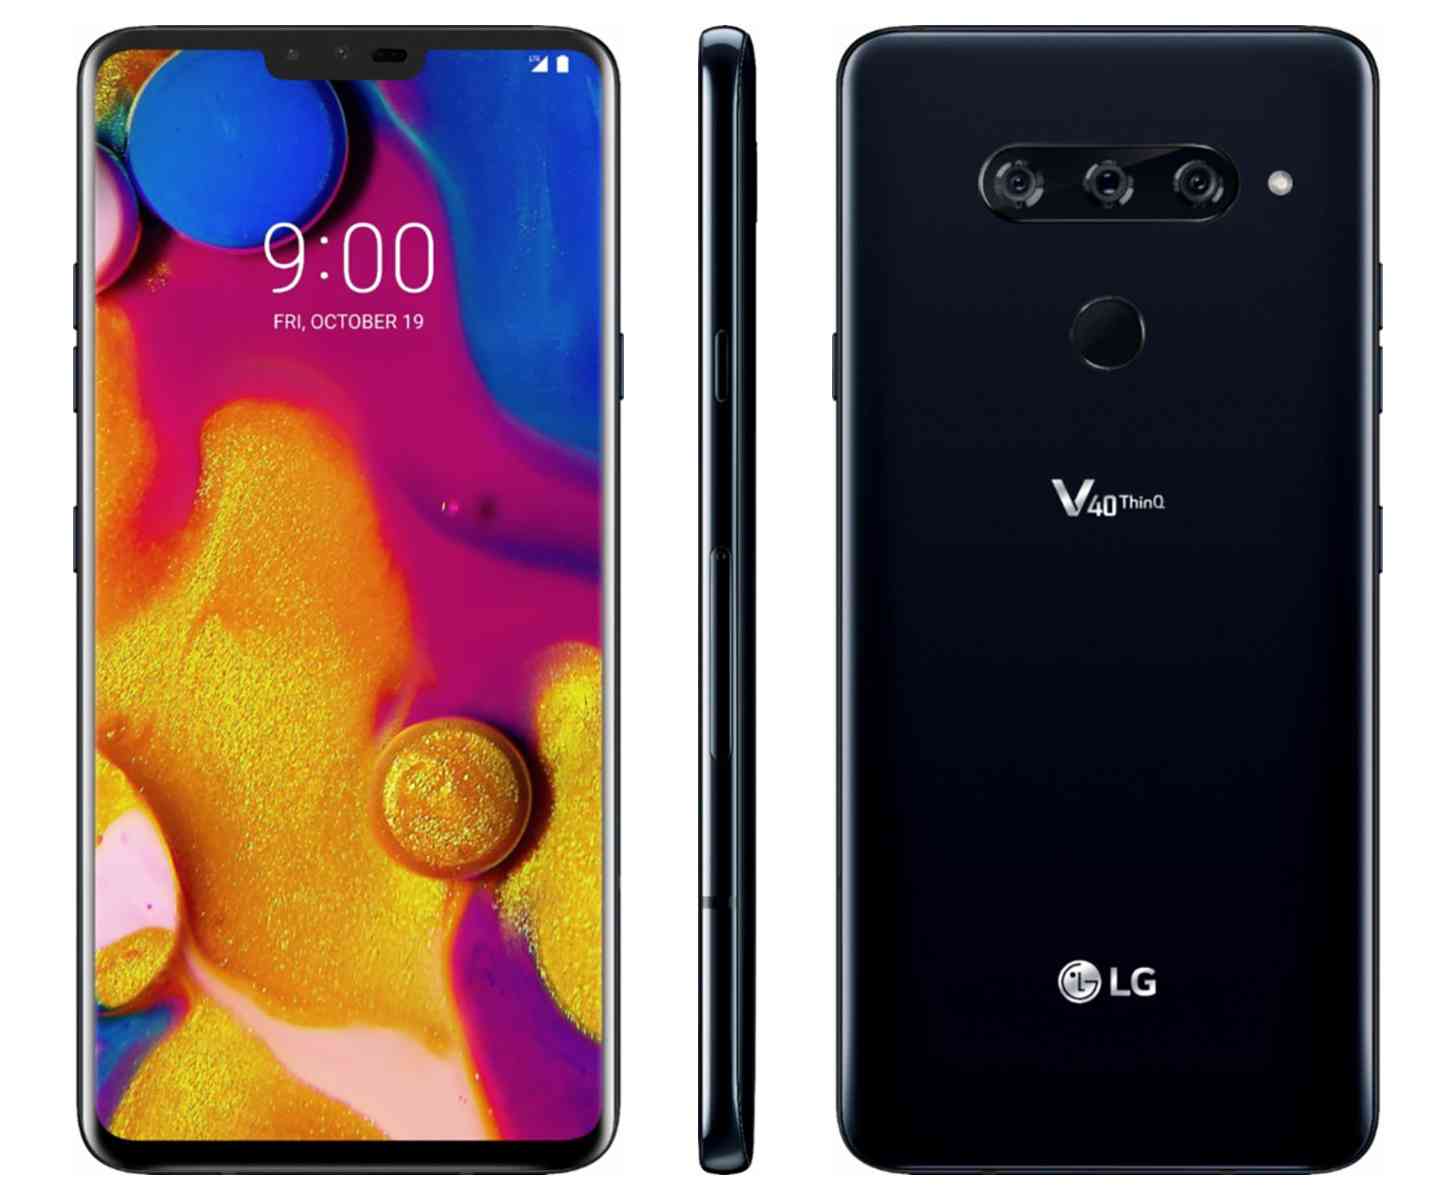 LG V40 ThinQ official images